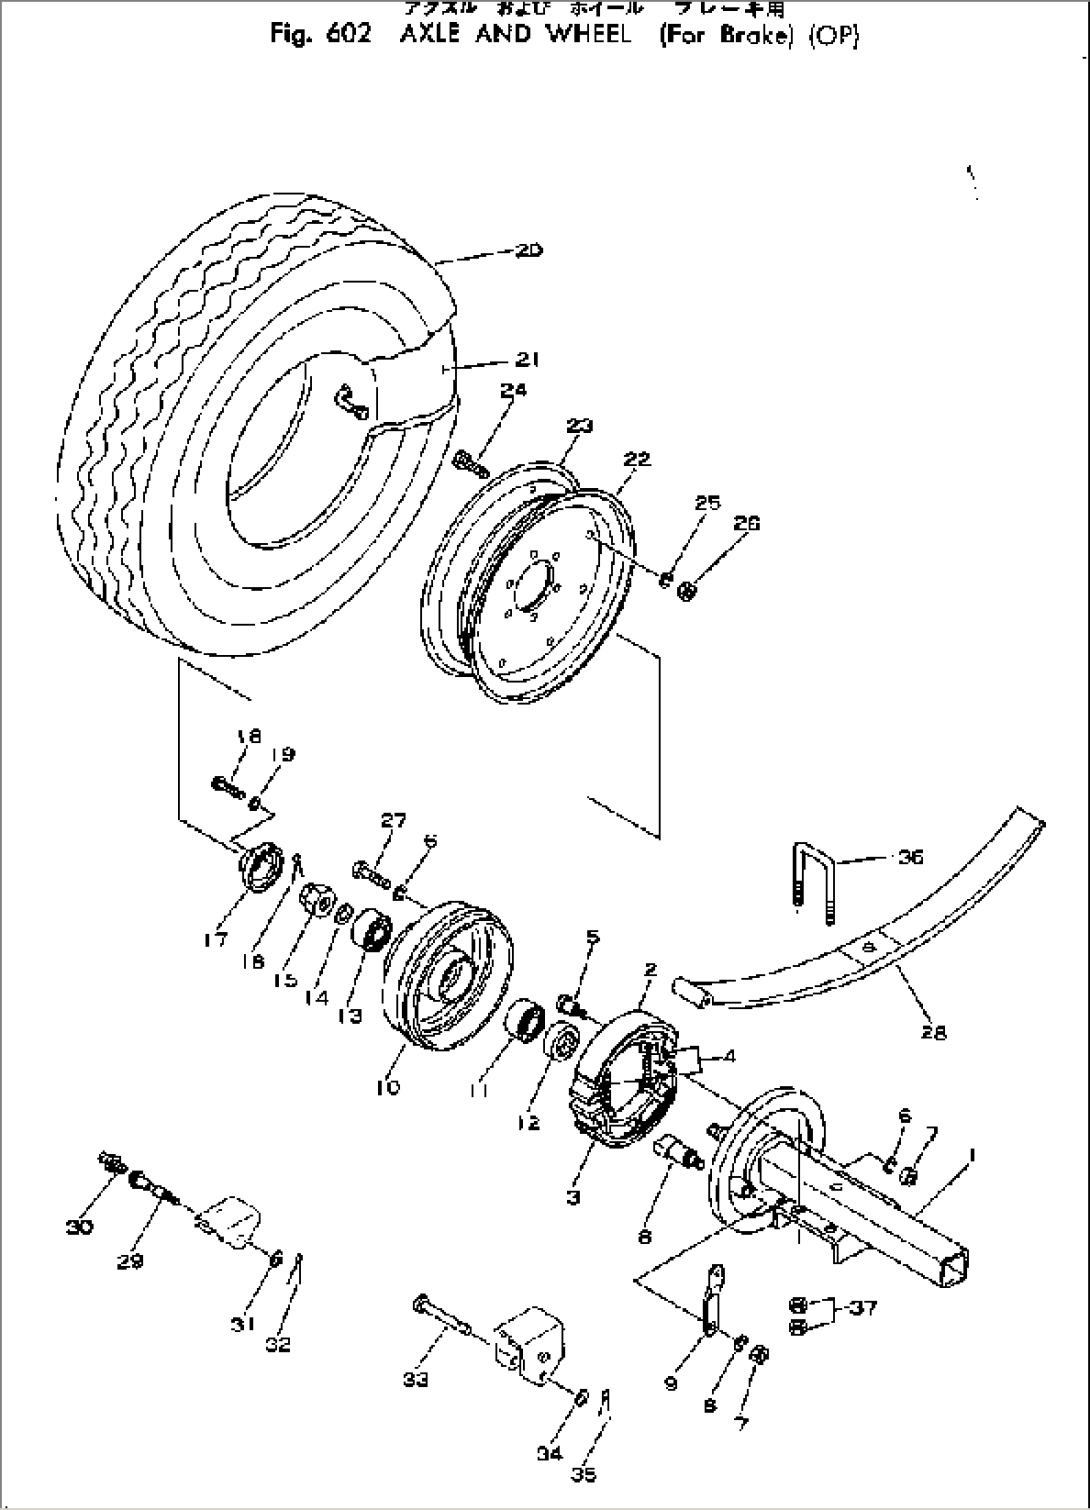 AXLE AND WHEEL (FOR BRAKE)